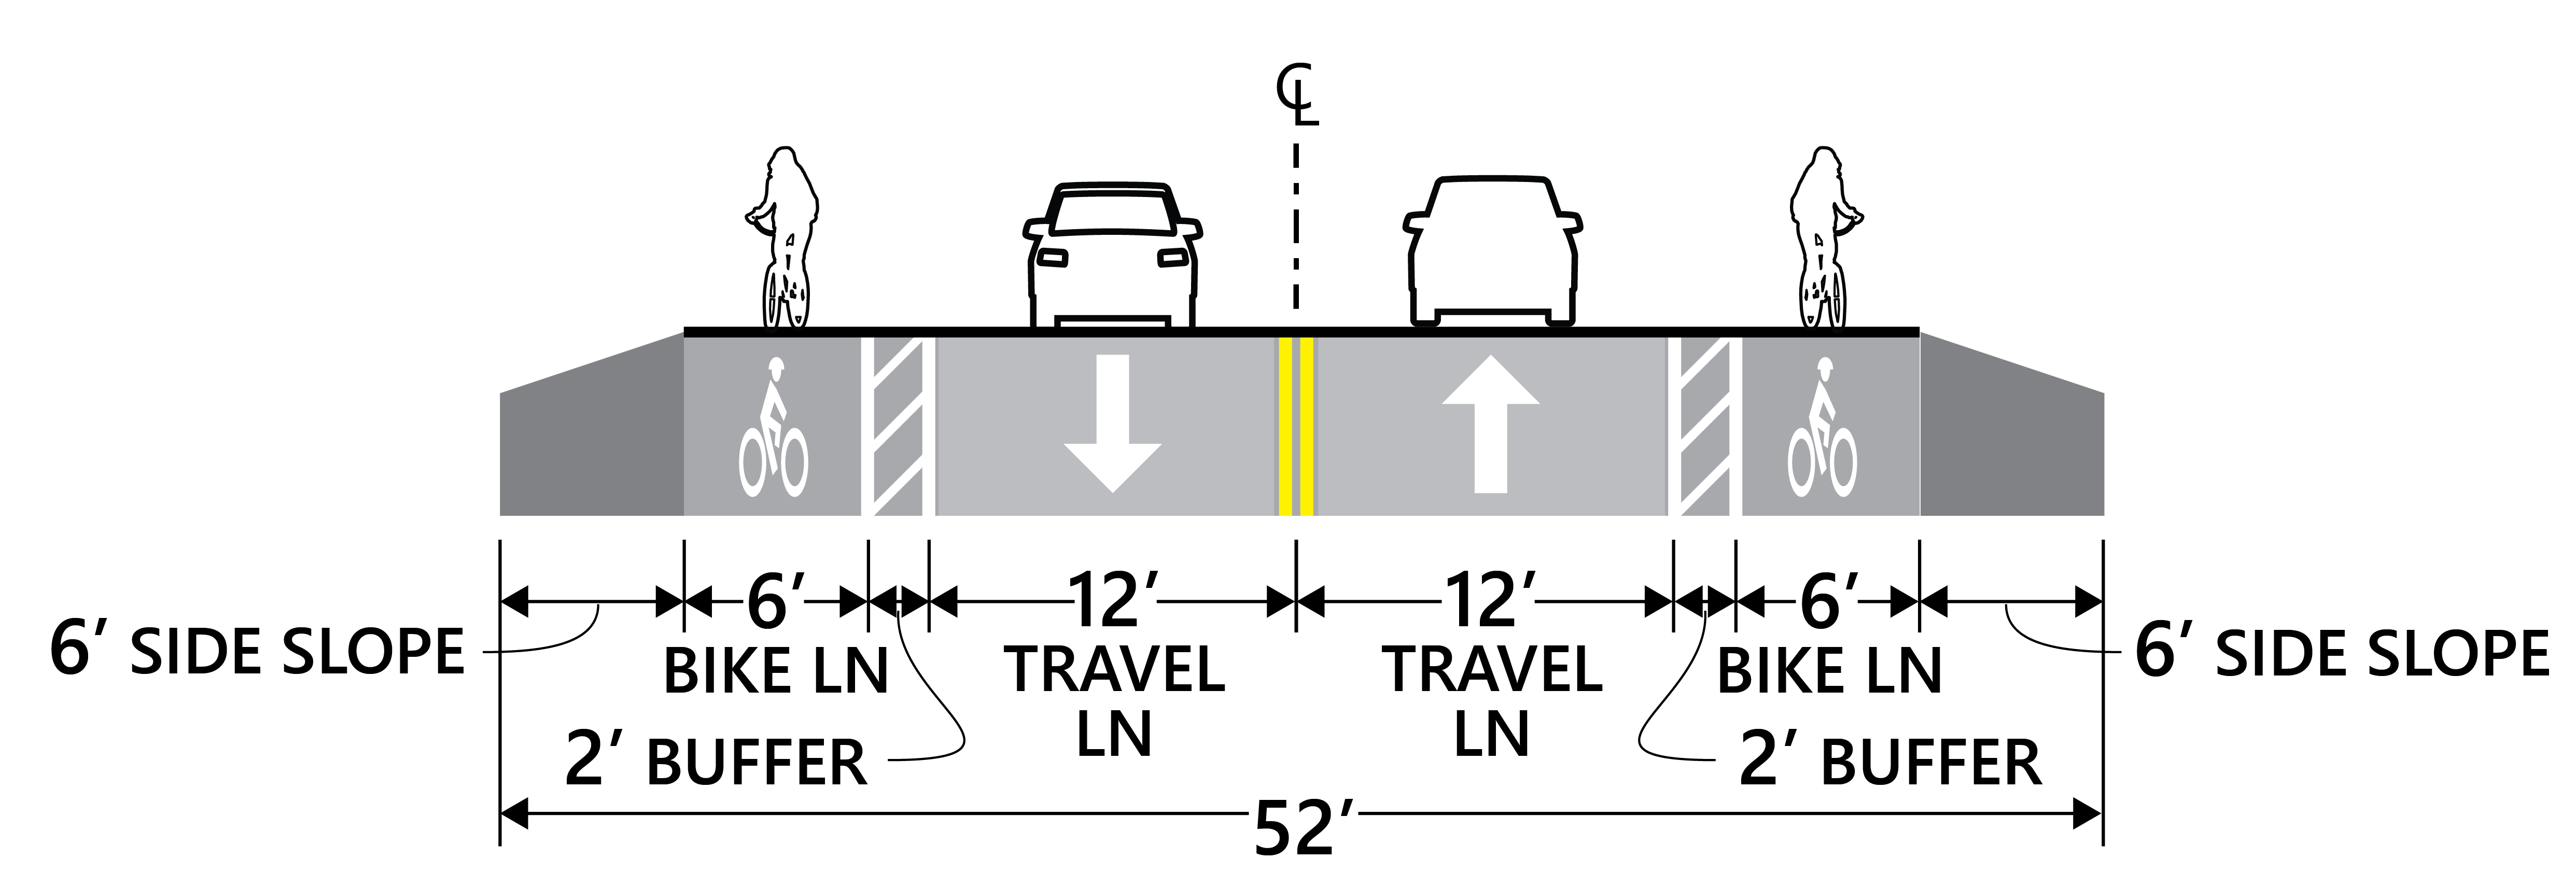 Cross section for frontage roads with 6' side slope, 6' bike lane, 2' buffer and 12' travel lane for vehicles in each direction. 